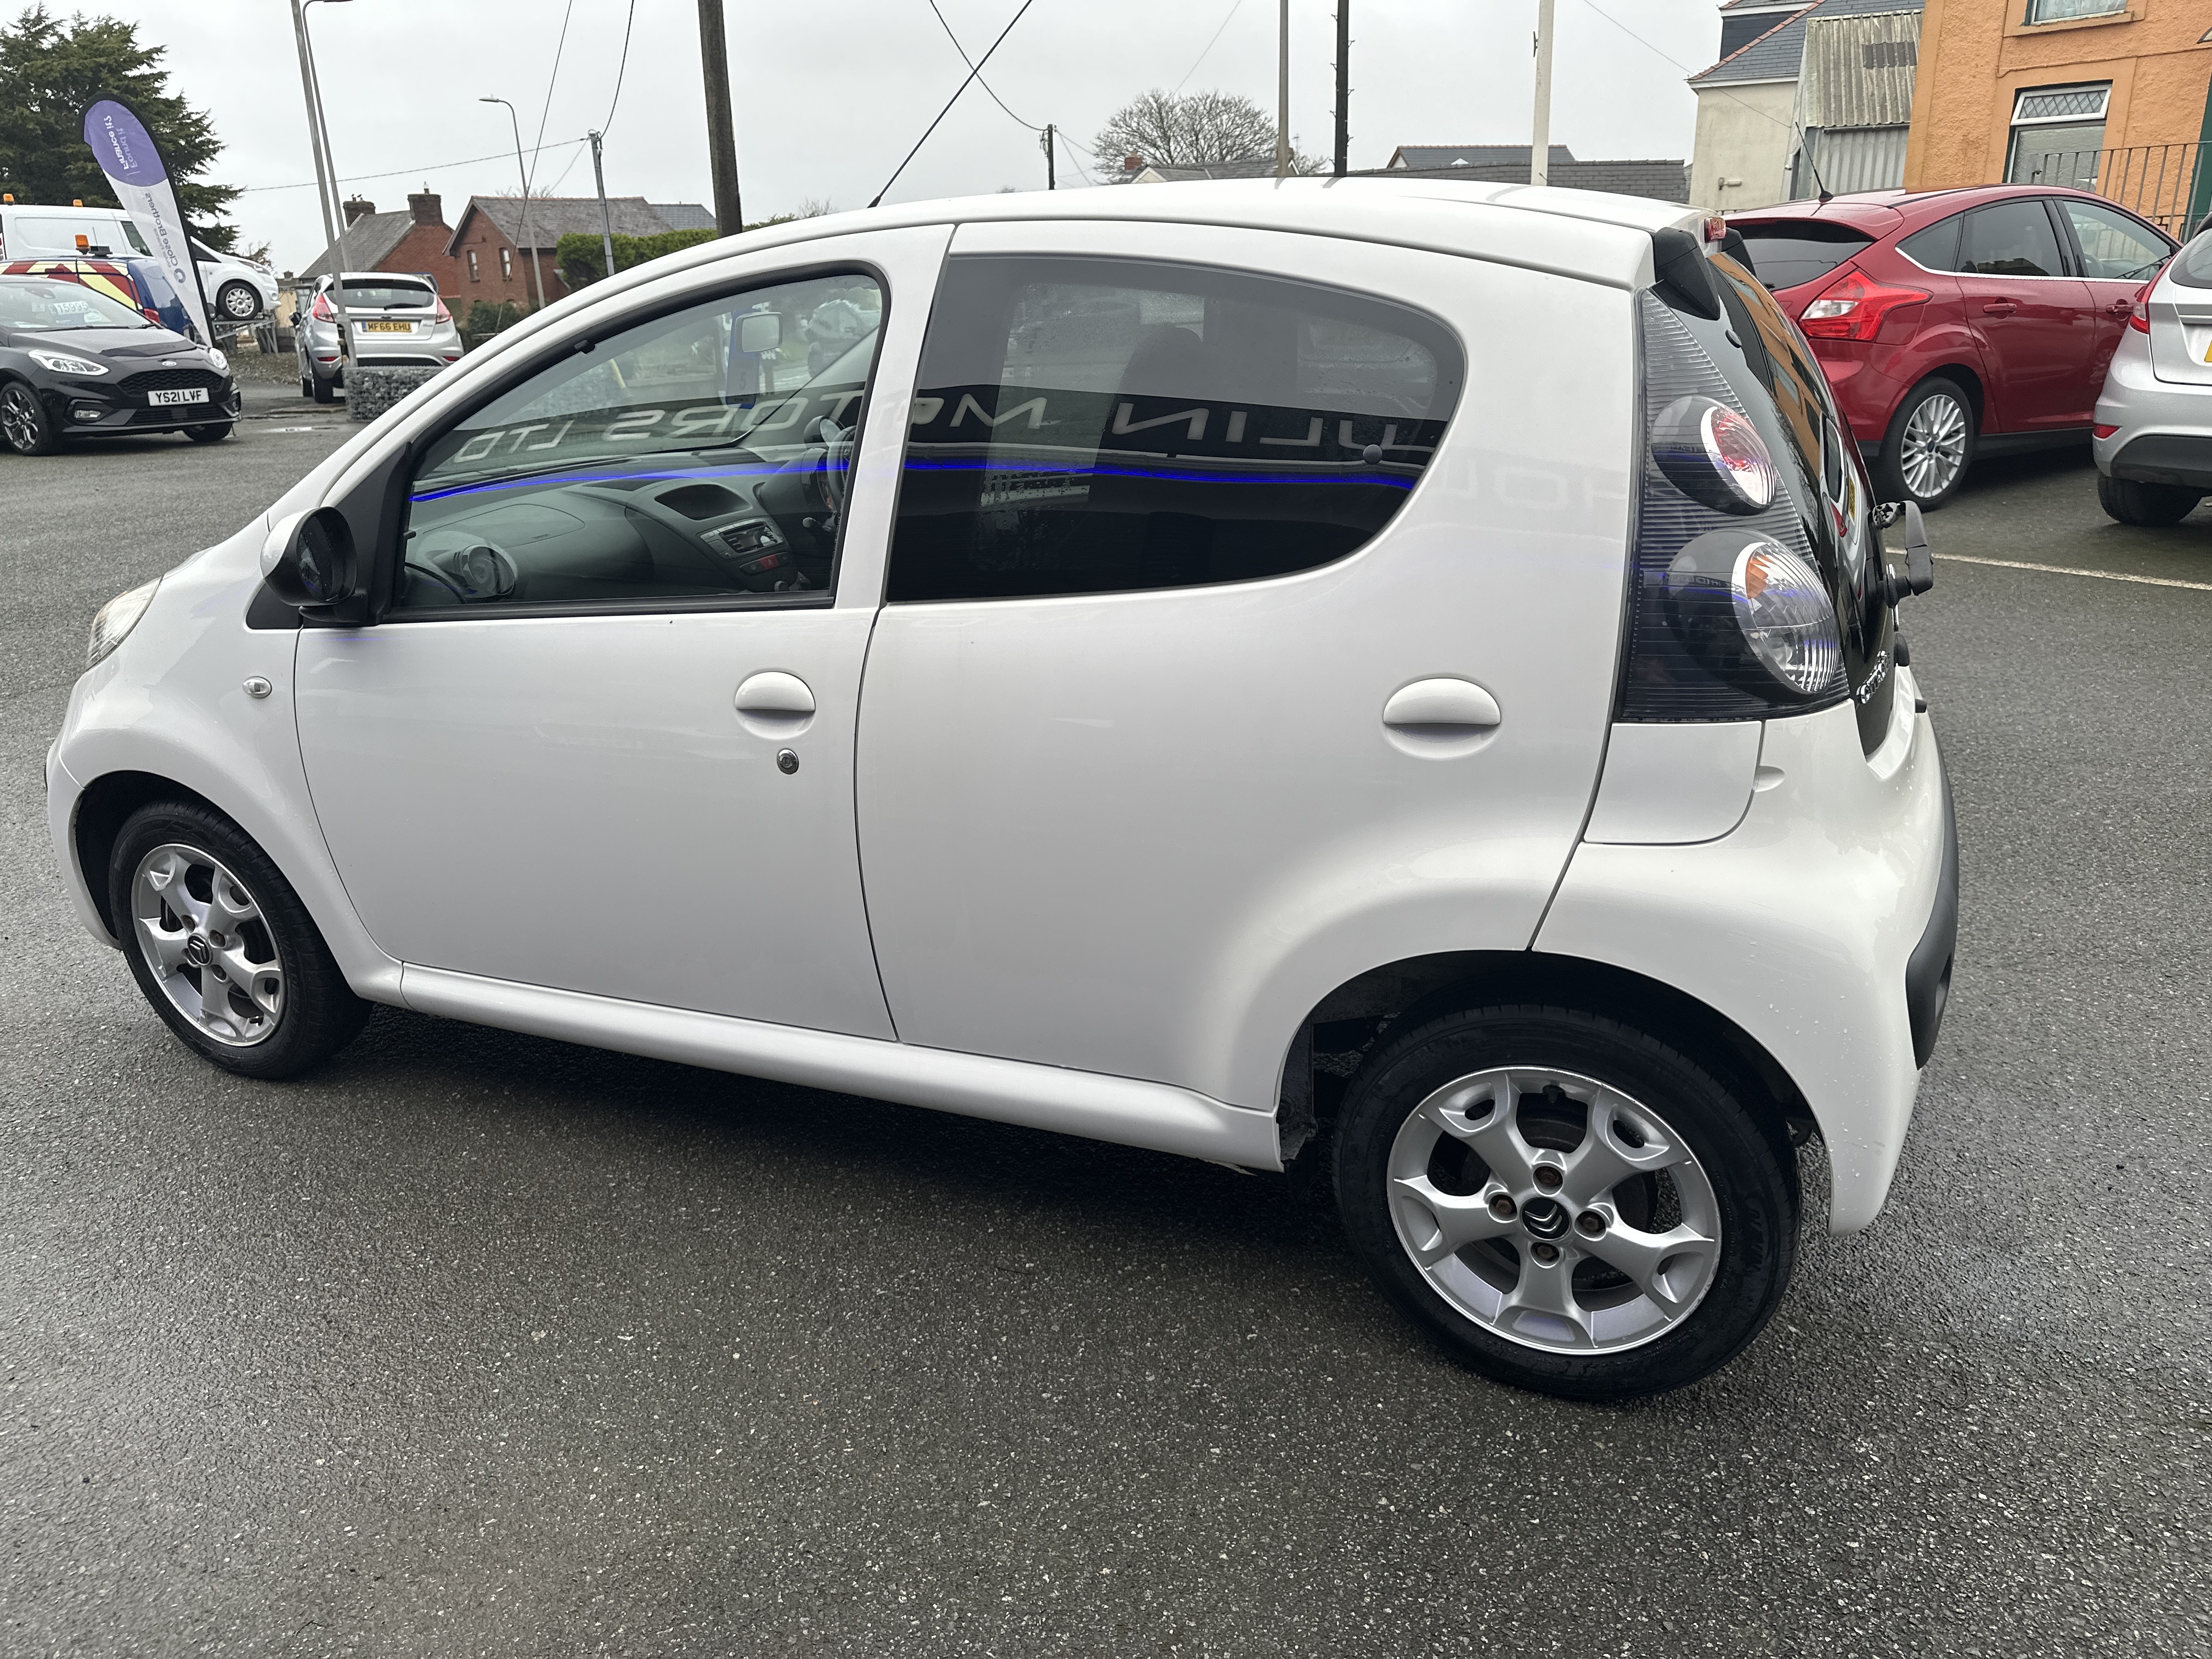 Citroen C1 VTR+ for sale at Mike Howlin Motor Sales Pembrokeshire